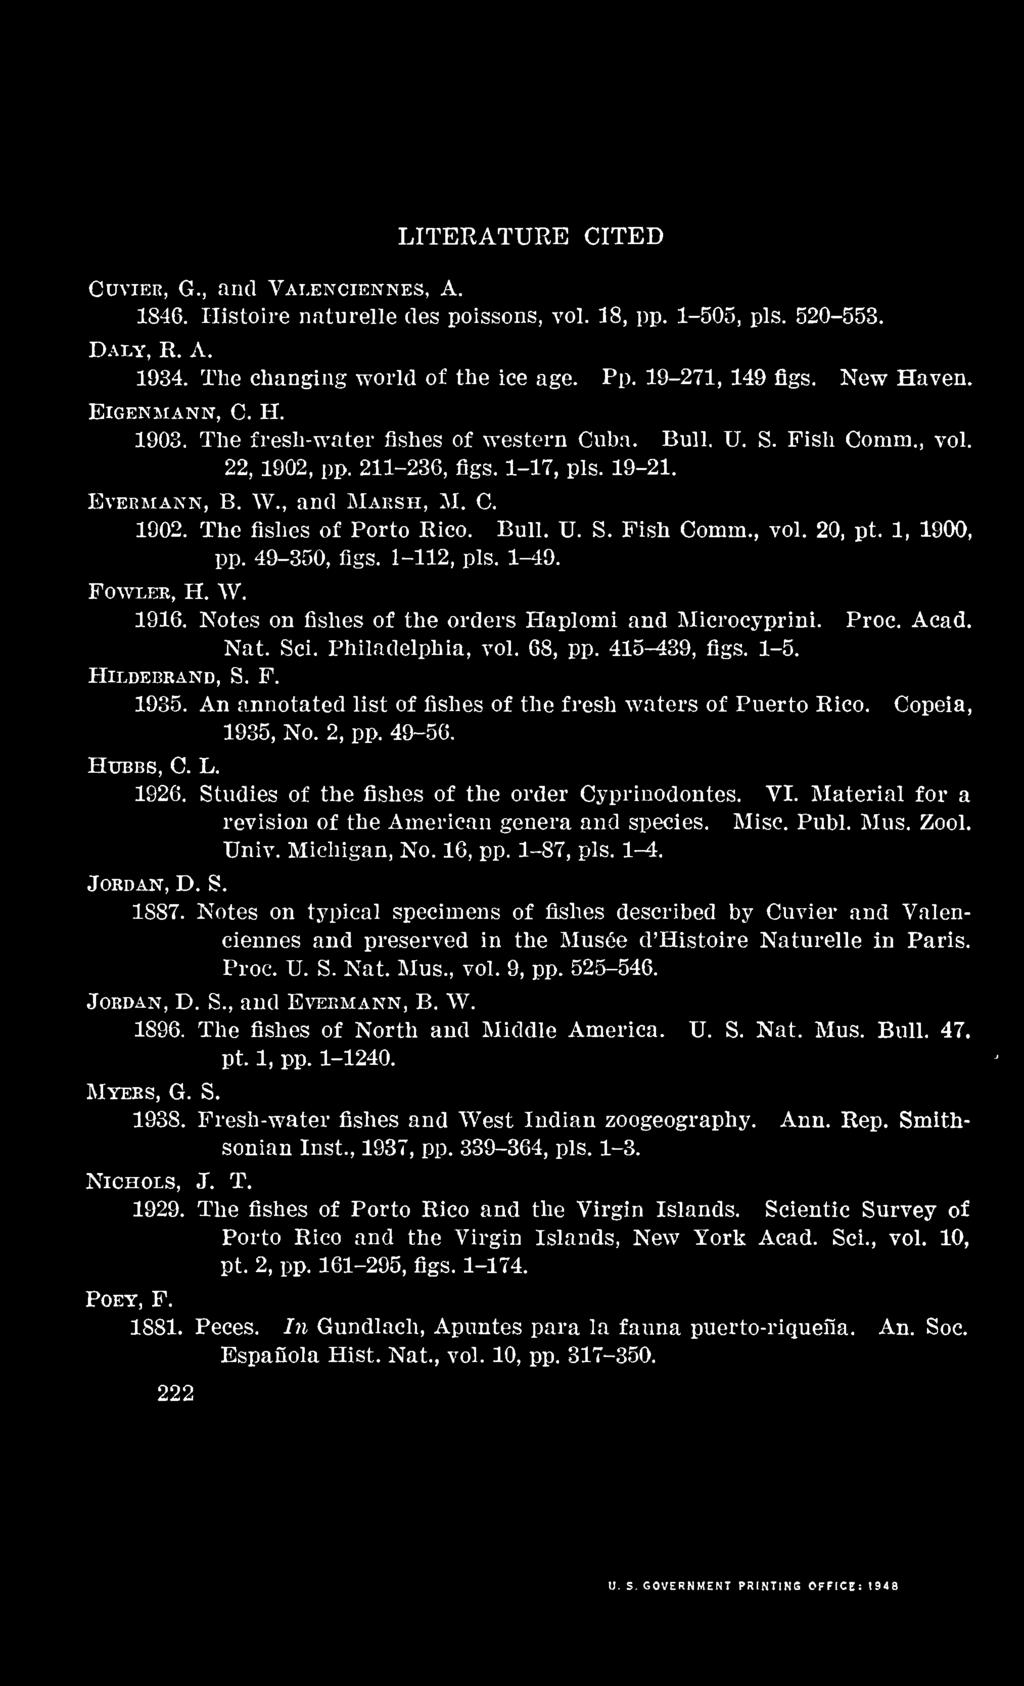 The fishes of Porto Rico. Bull. U. S. Fish Comm., vol. 20, pt. 1, 1900, pp. 49-350, figs. 1-112, pis. 1-40. Fowler, H. W. 1916. Notes on fishes of the orders Haplomi and Microcyprini. Proc. Acad.